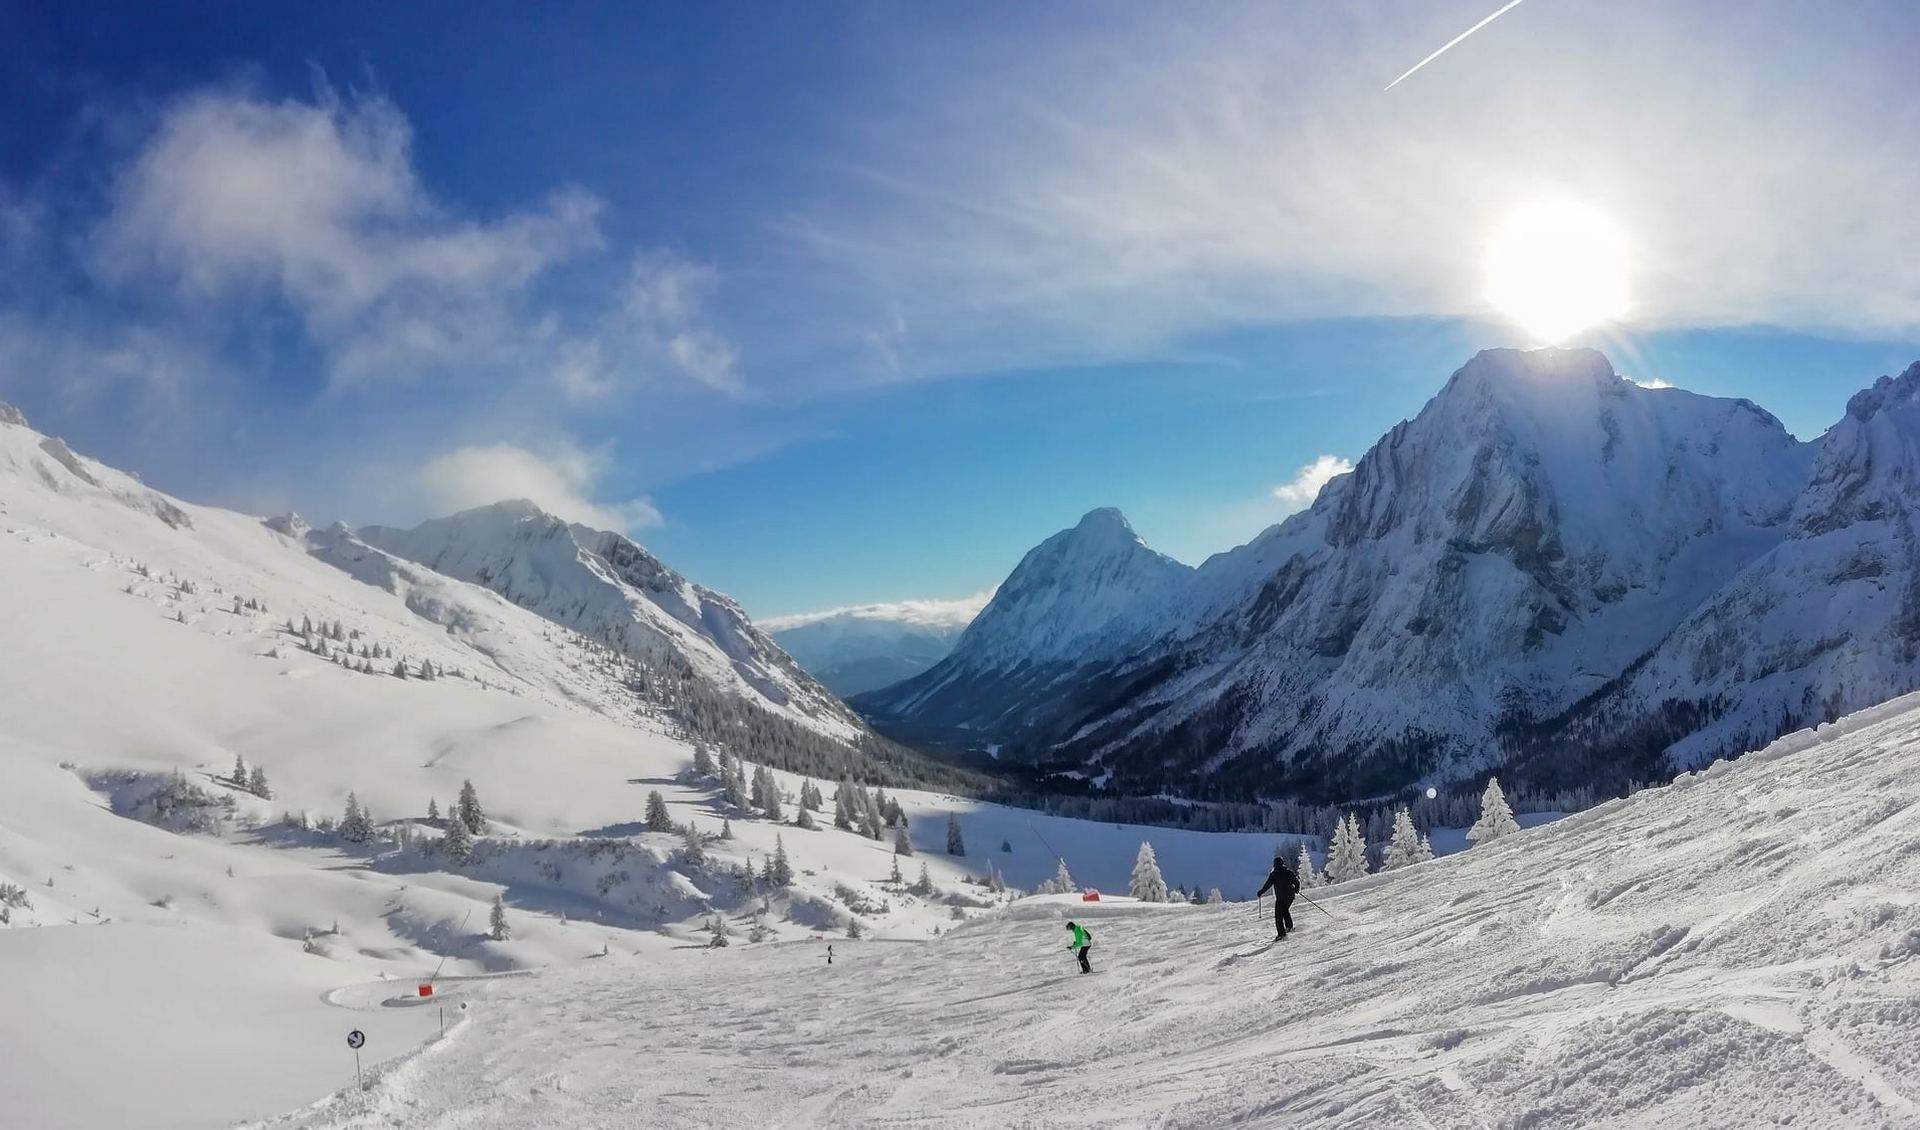 Austria in March: A Boost of Energy and Inspiration